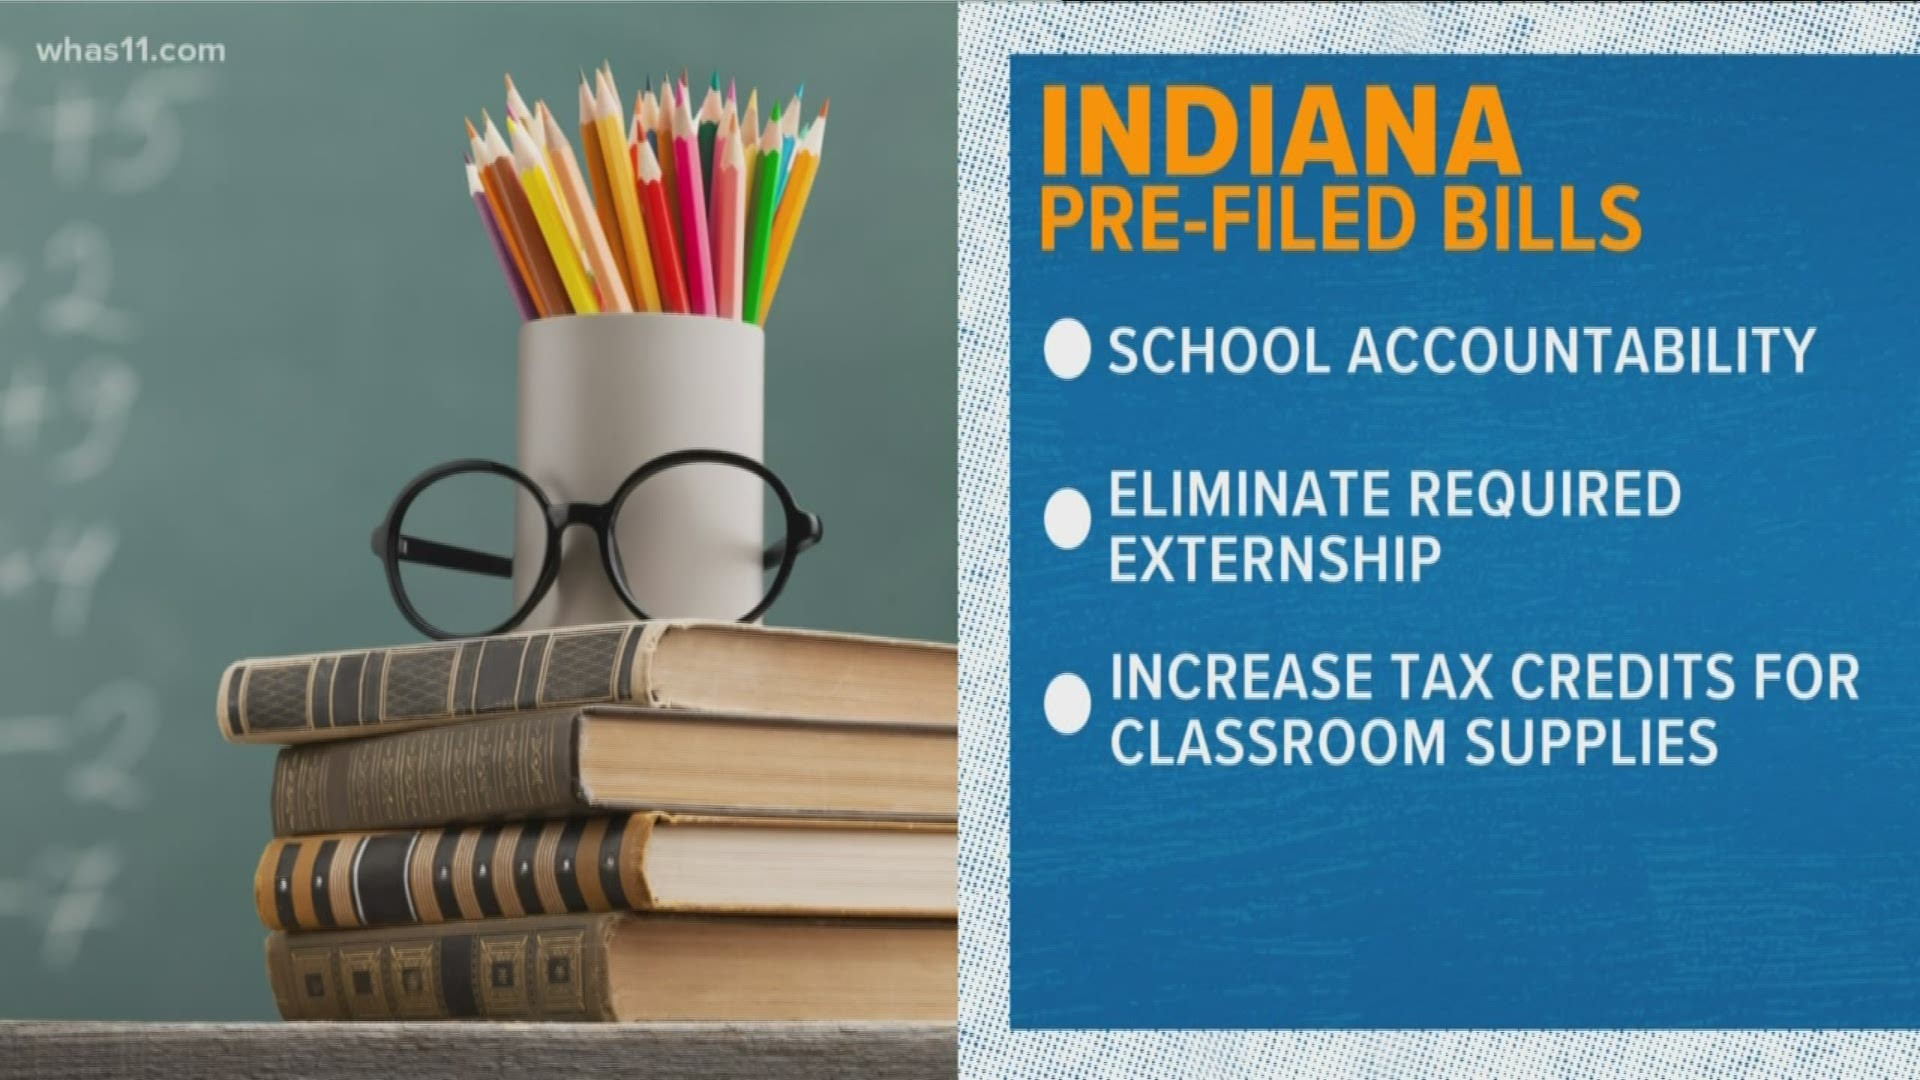 Bills focusing on school accountability and tax credits have been pre-filed for the 2020 legislative session.